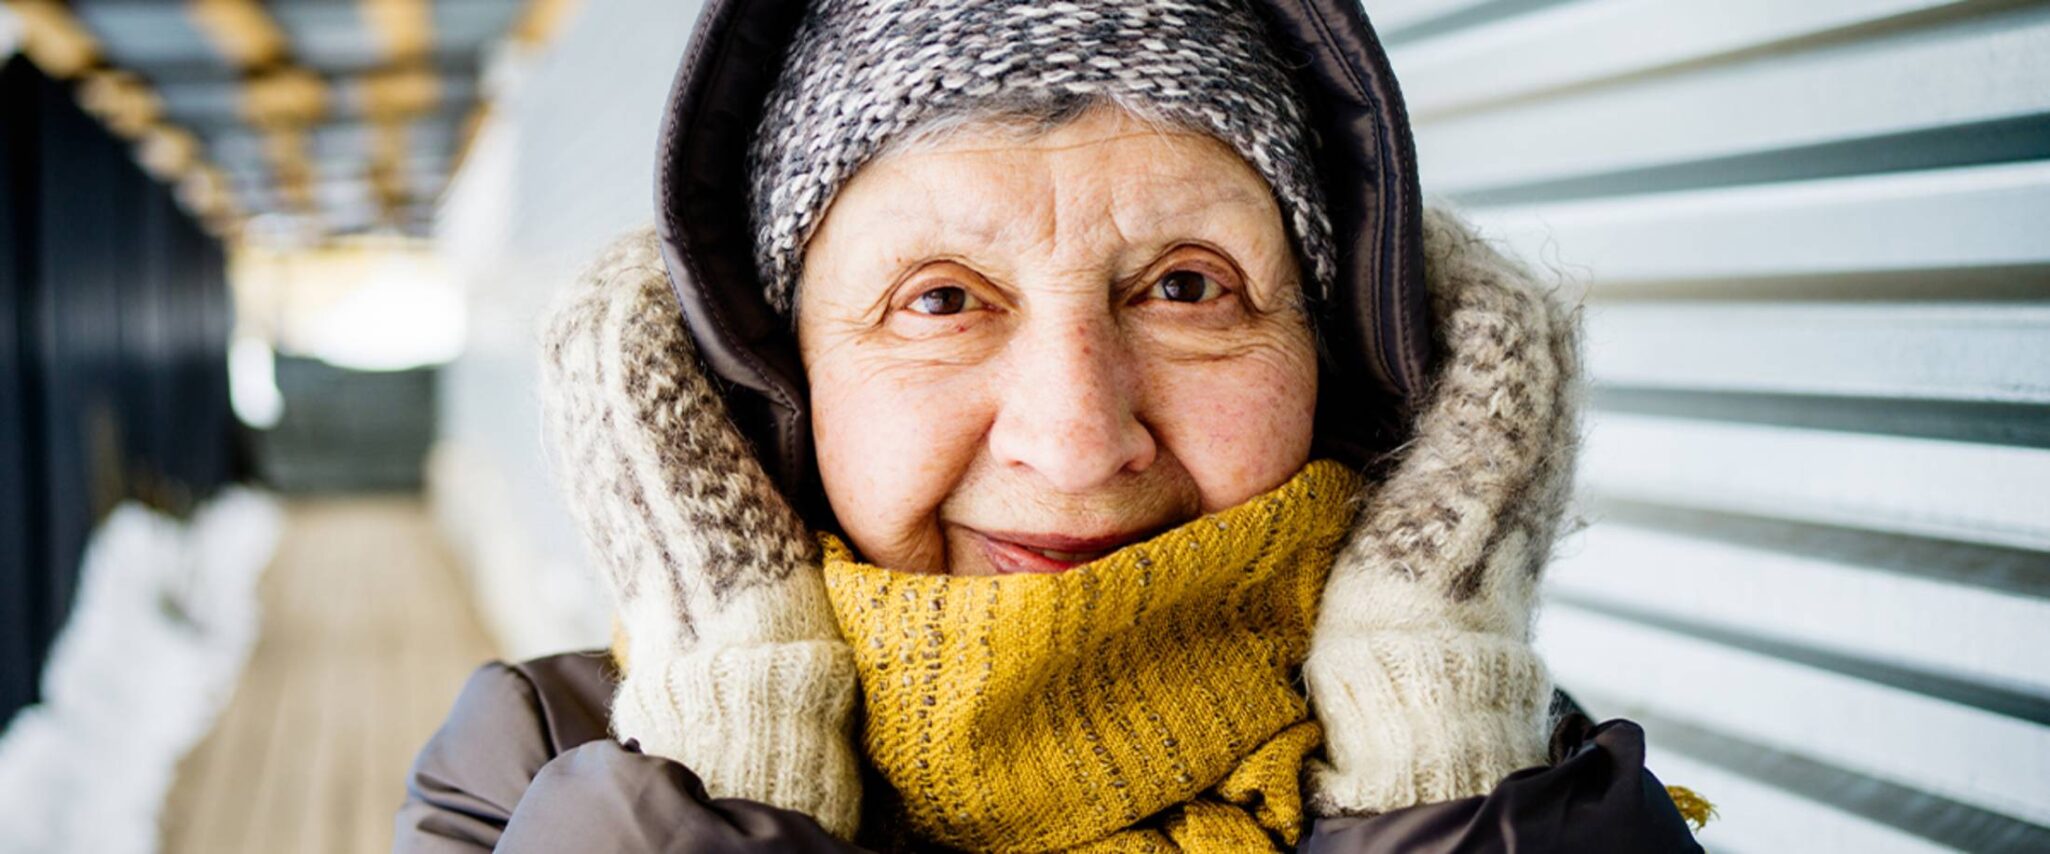 elderly woman covering her ears with her mitten covered hands on a chilly day